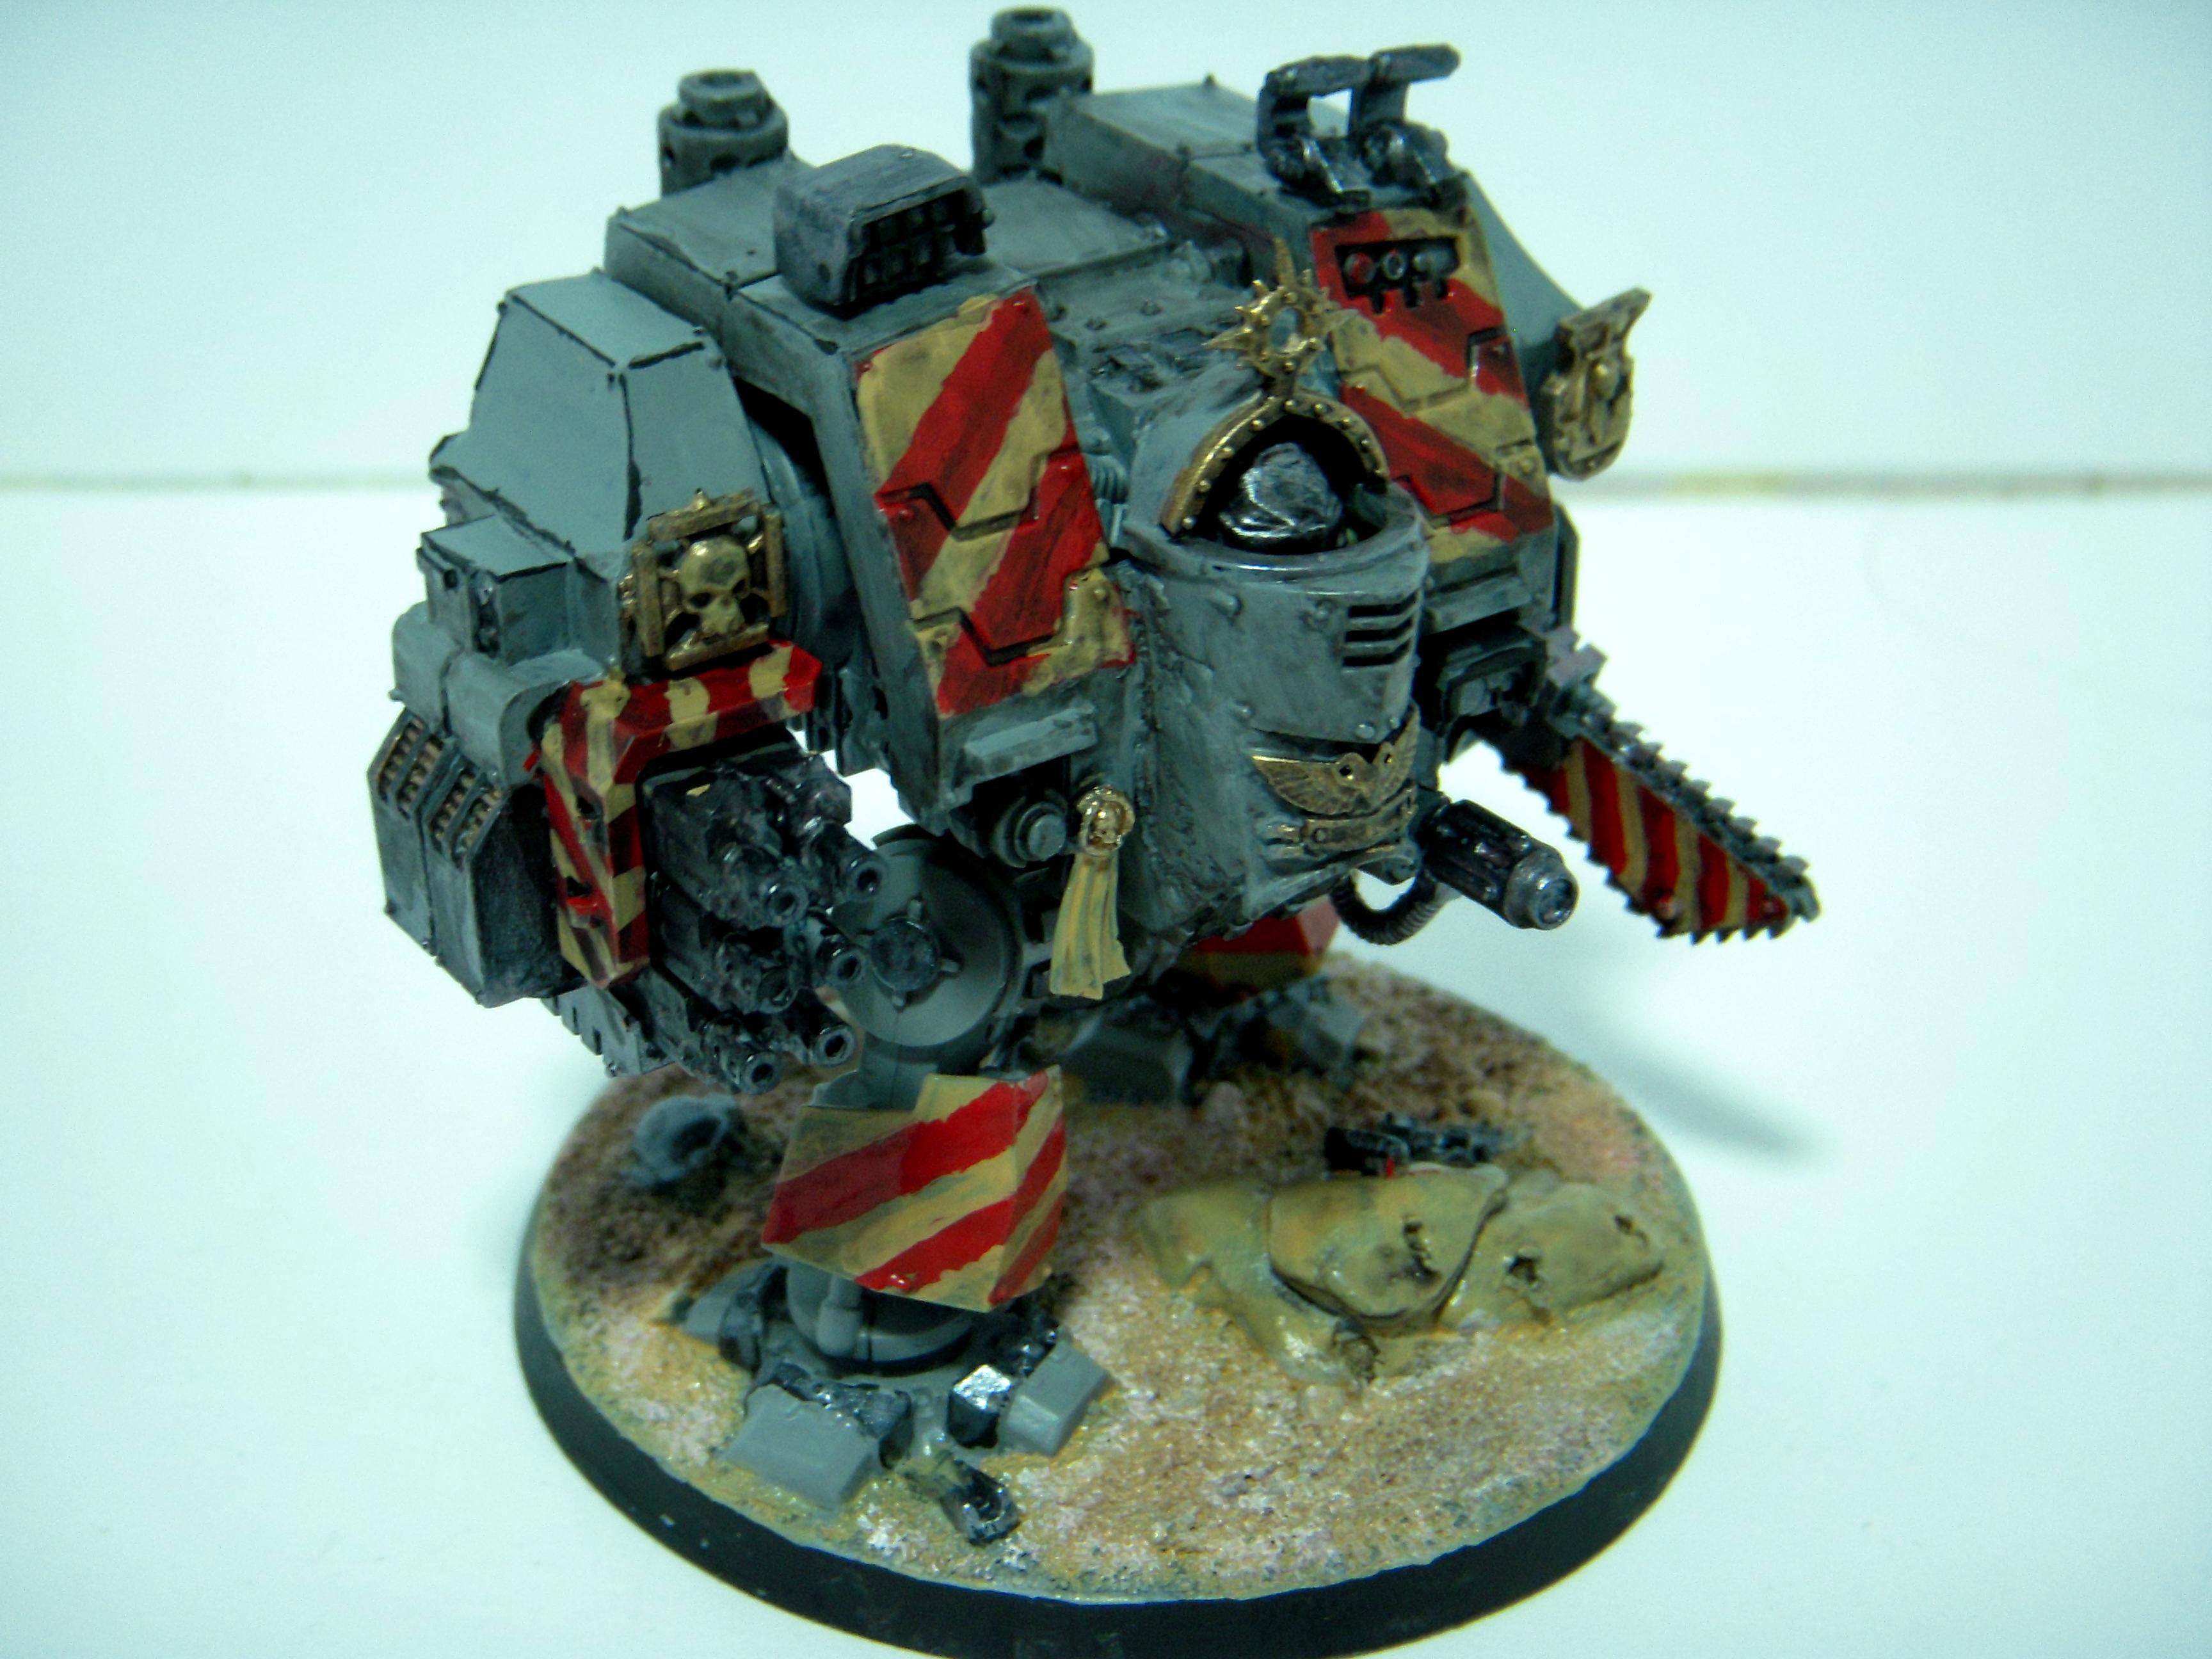 Dreadnought, Forge World, Ironclad, Space Marines, Warhammer 40,000